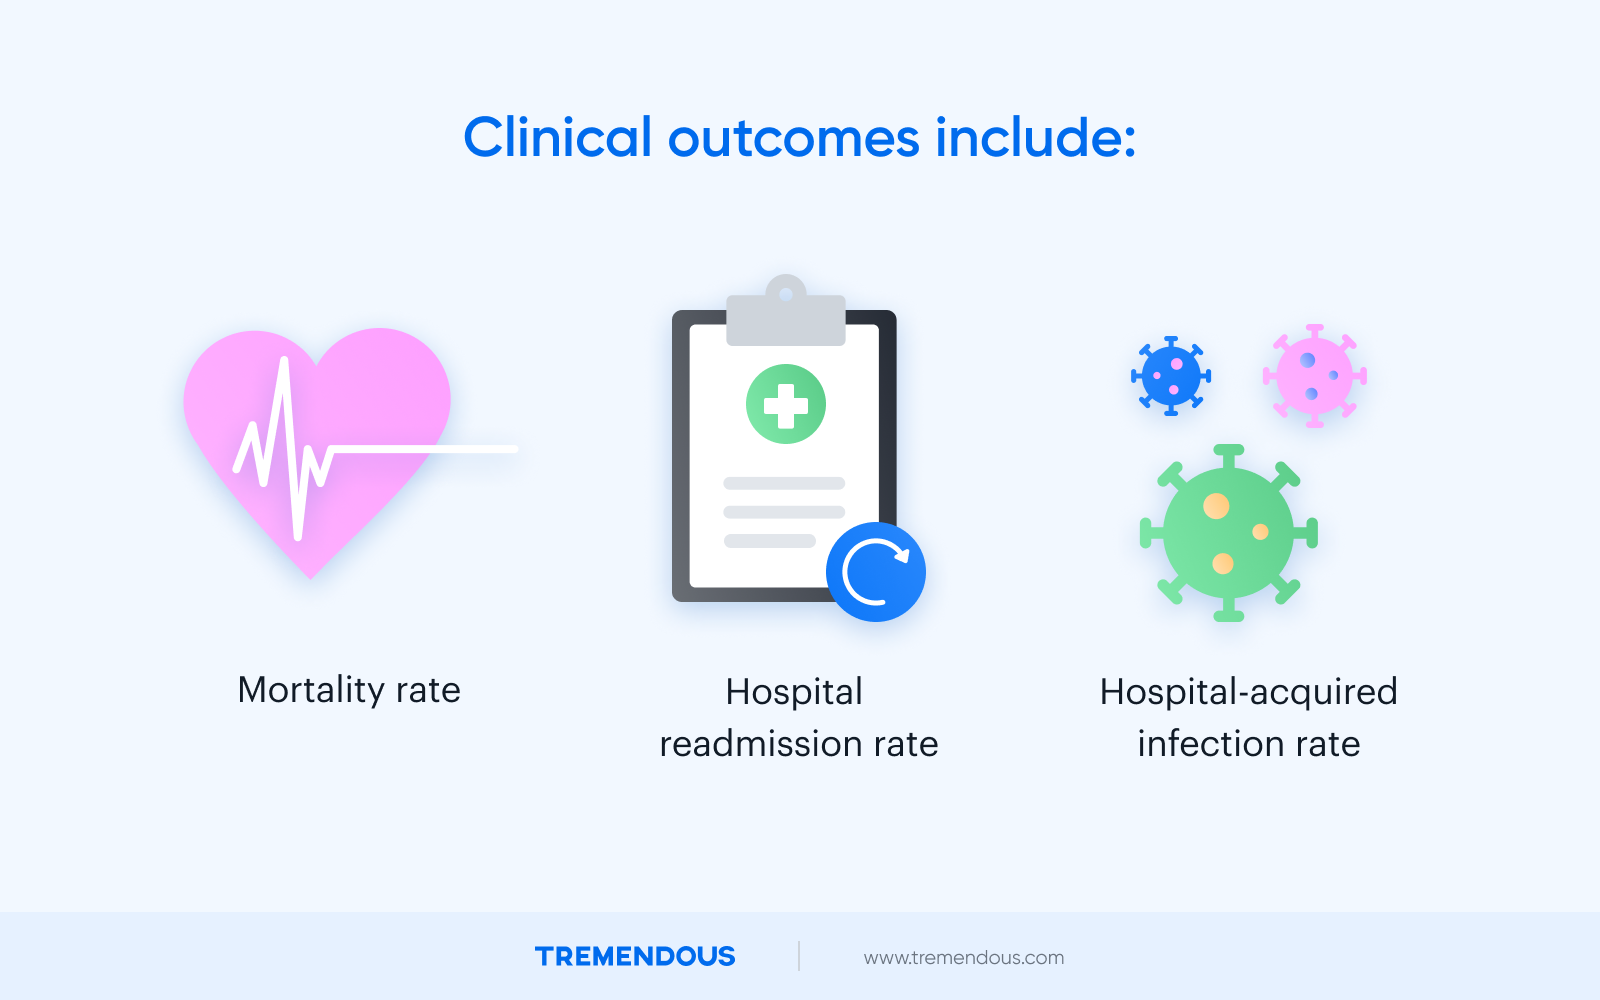 Text reads: "Clinical outcomes include." Then, there are three images: one of a heart monitor, one of a clipboard, and one of a virus. Below these images, text reads: "Mortality rate, hospital readmission rate, and hospital-acquired infection rate."